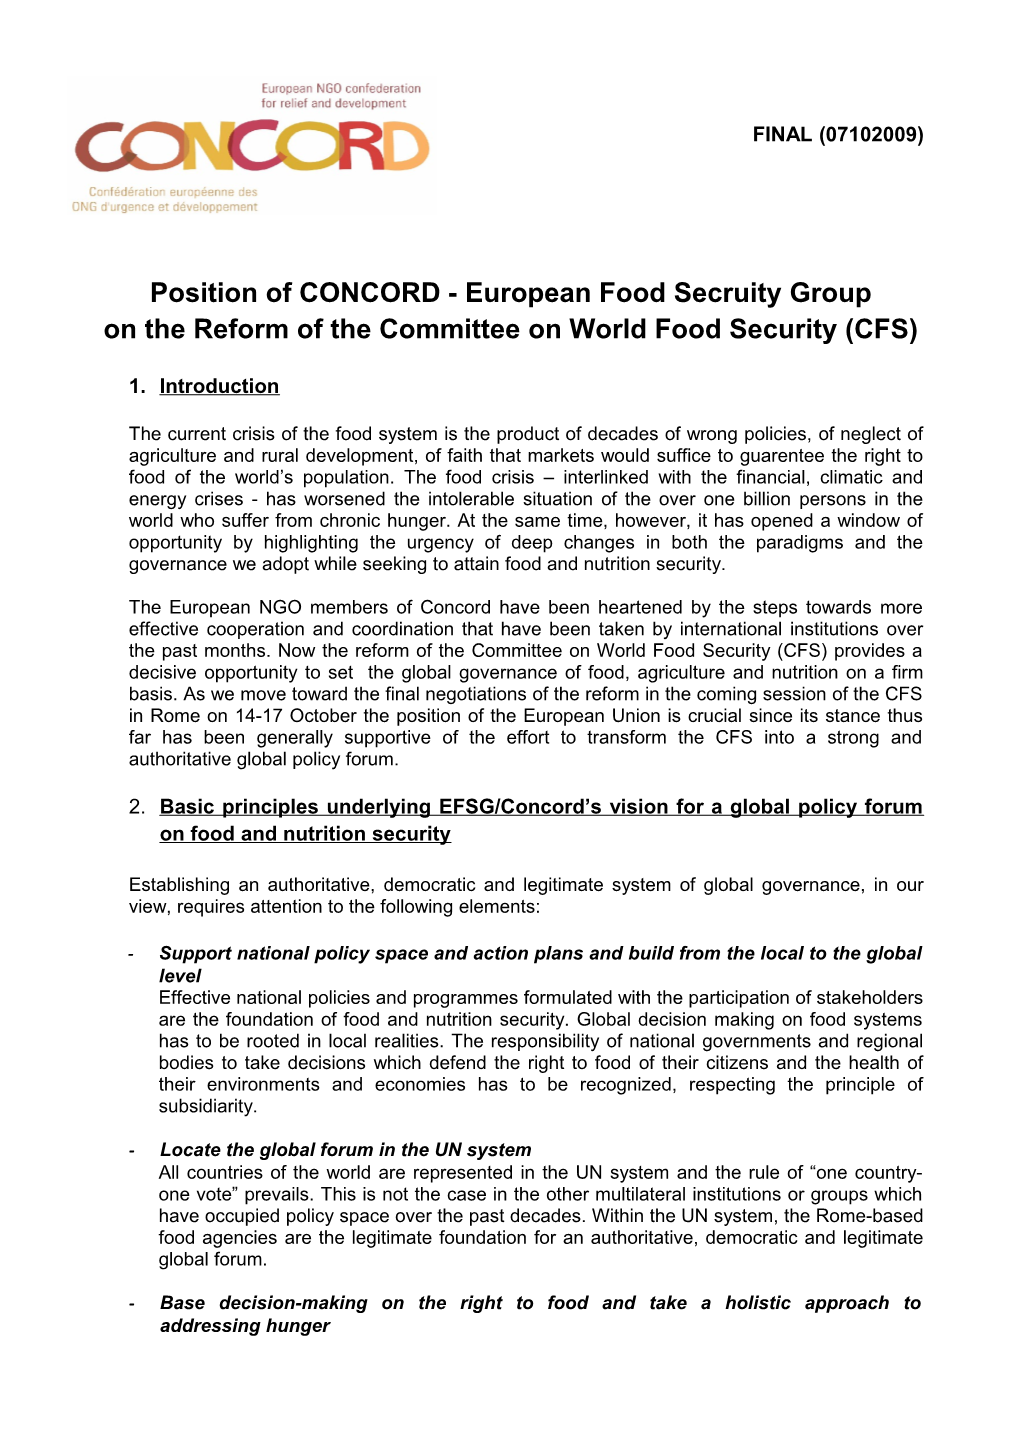 Position of CONCORD- European Food Secruity Group